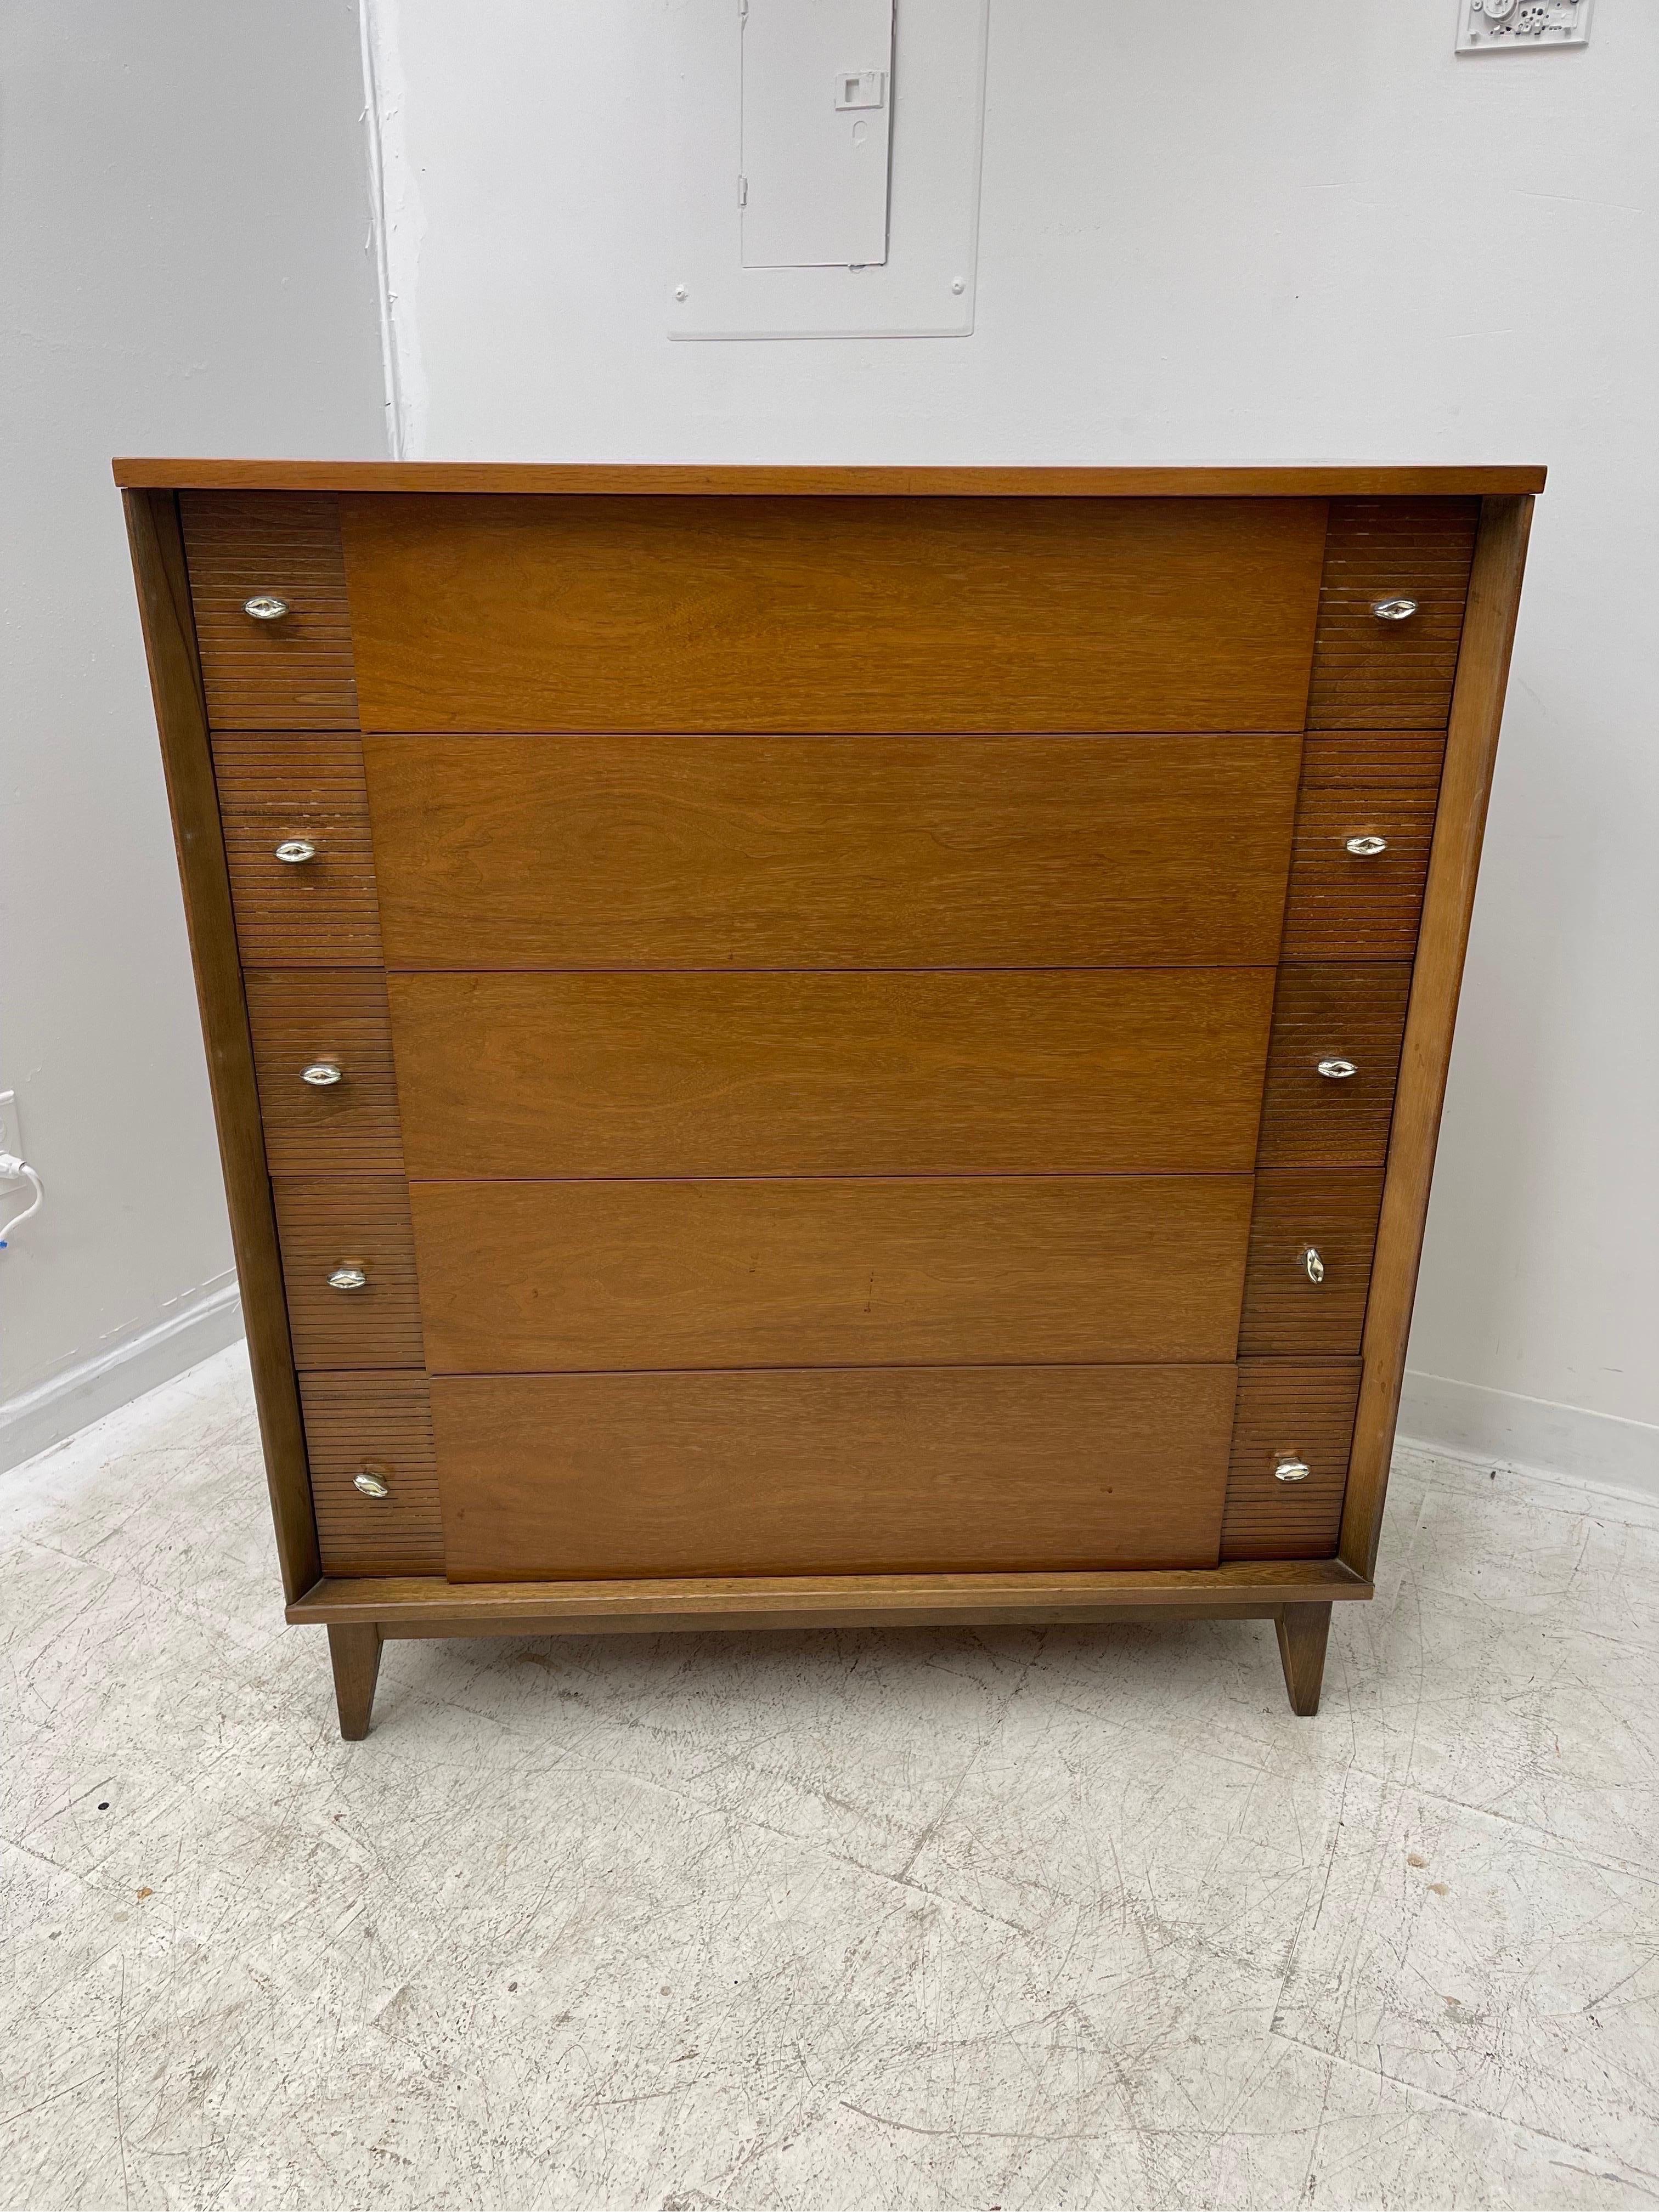 Vintage Mid-Century Modern Dresser With Dovetail Drawers Cabinet Storage 
Dimensions. 38 W ; 44 H ; 19 D.